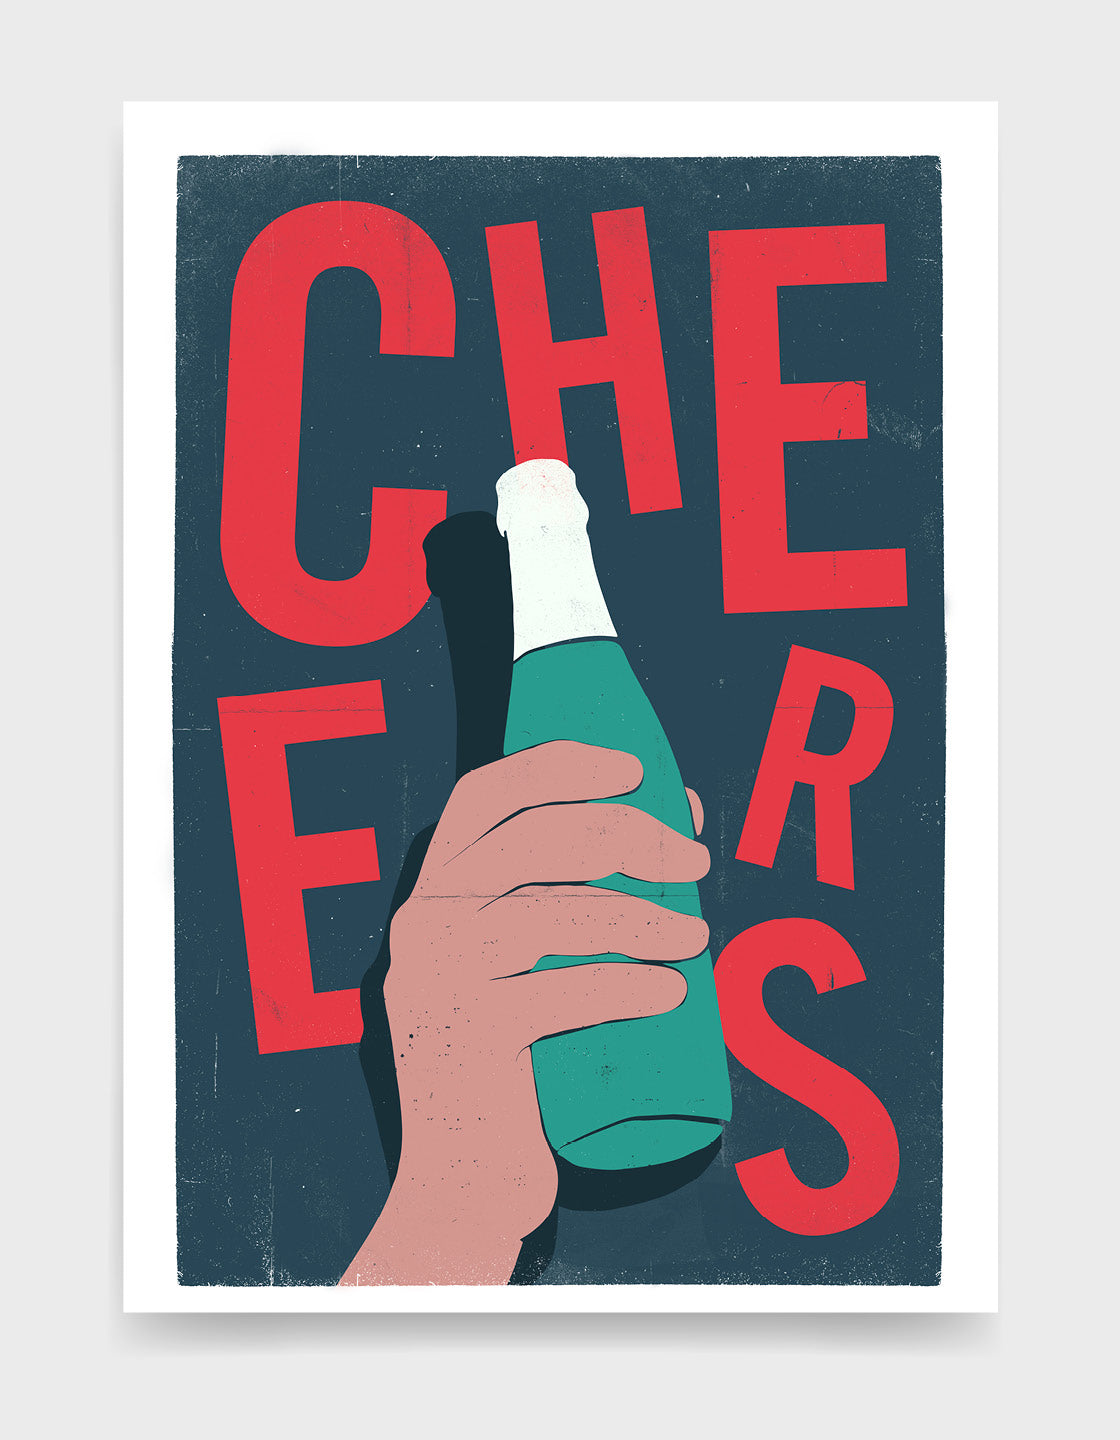 Print depicts a hand holding a bottle of beer in a 3d effect over text which says cheers in red type against a dark grey background